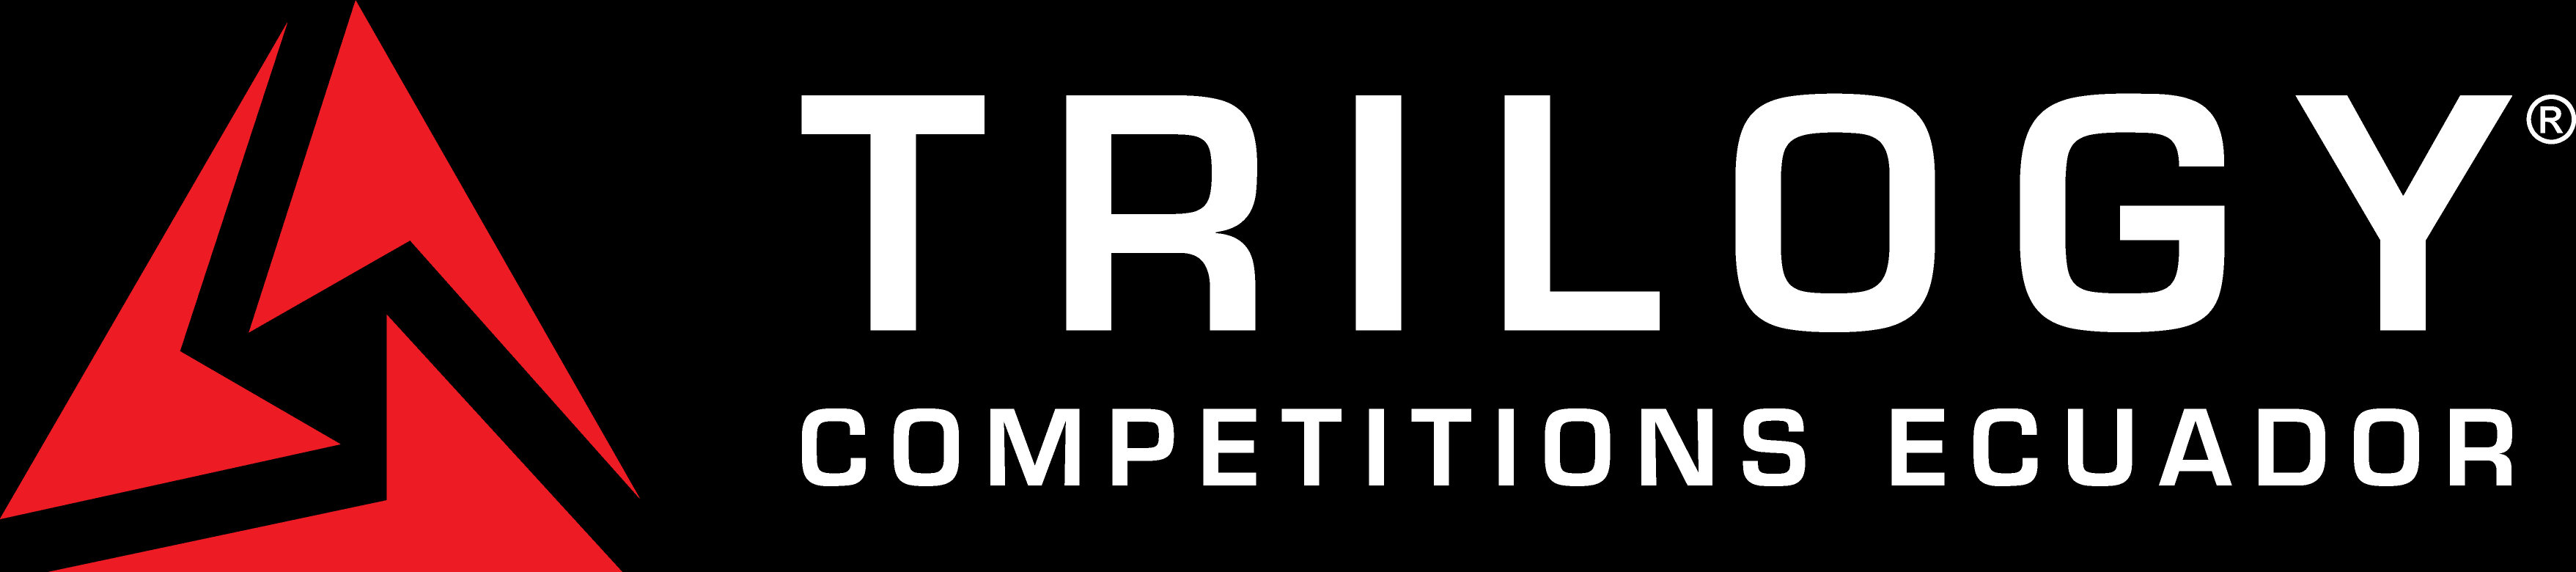 trilogycompetitions